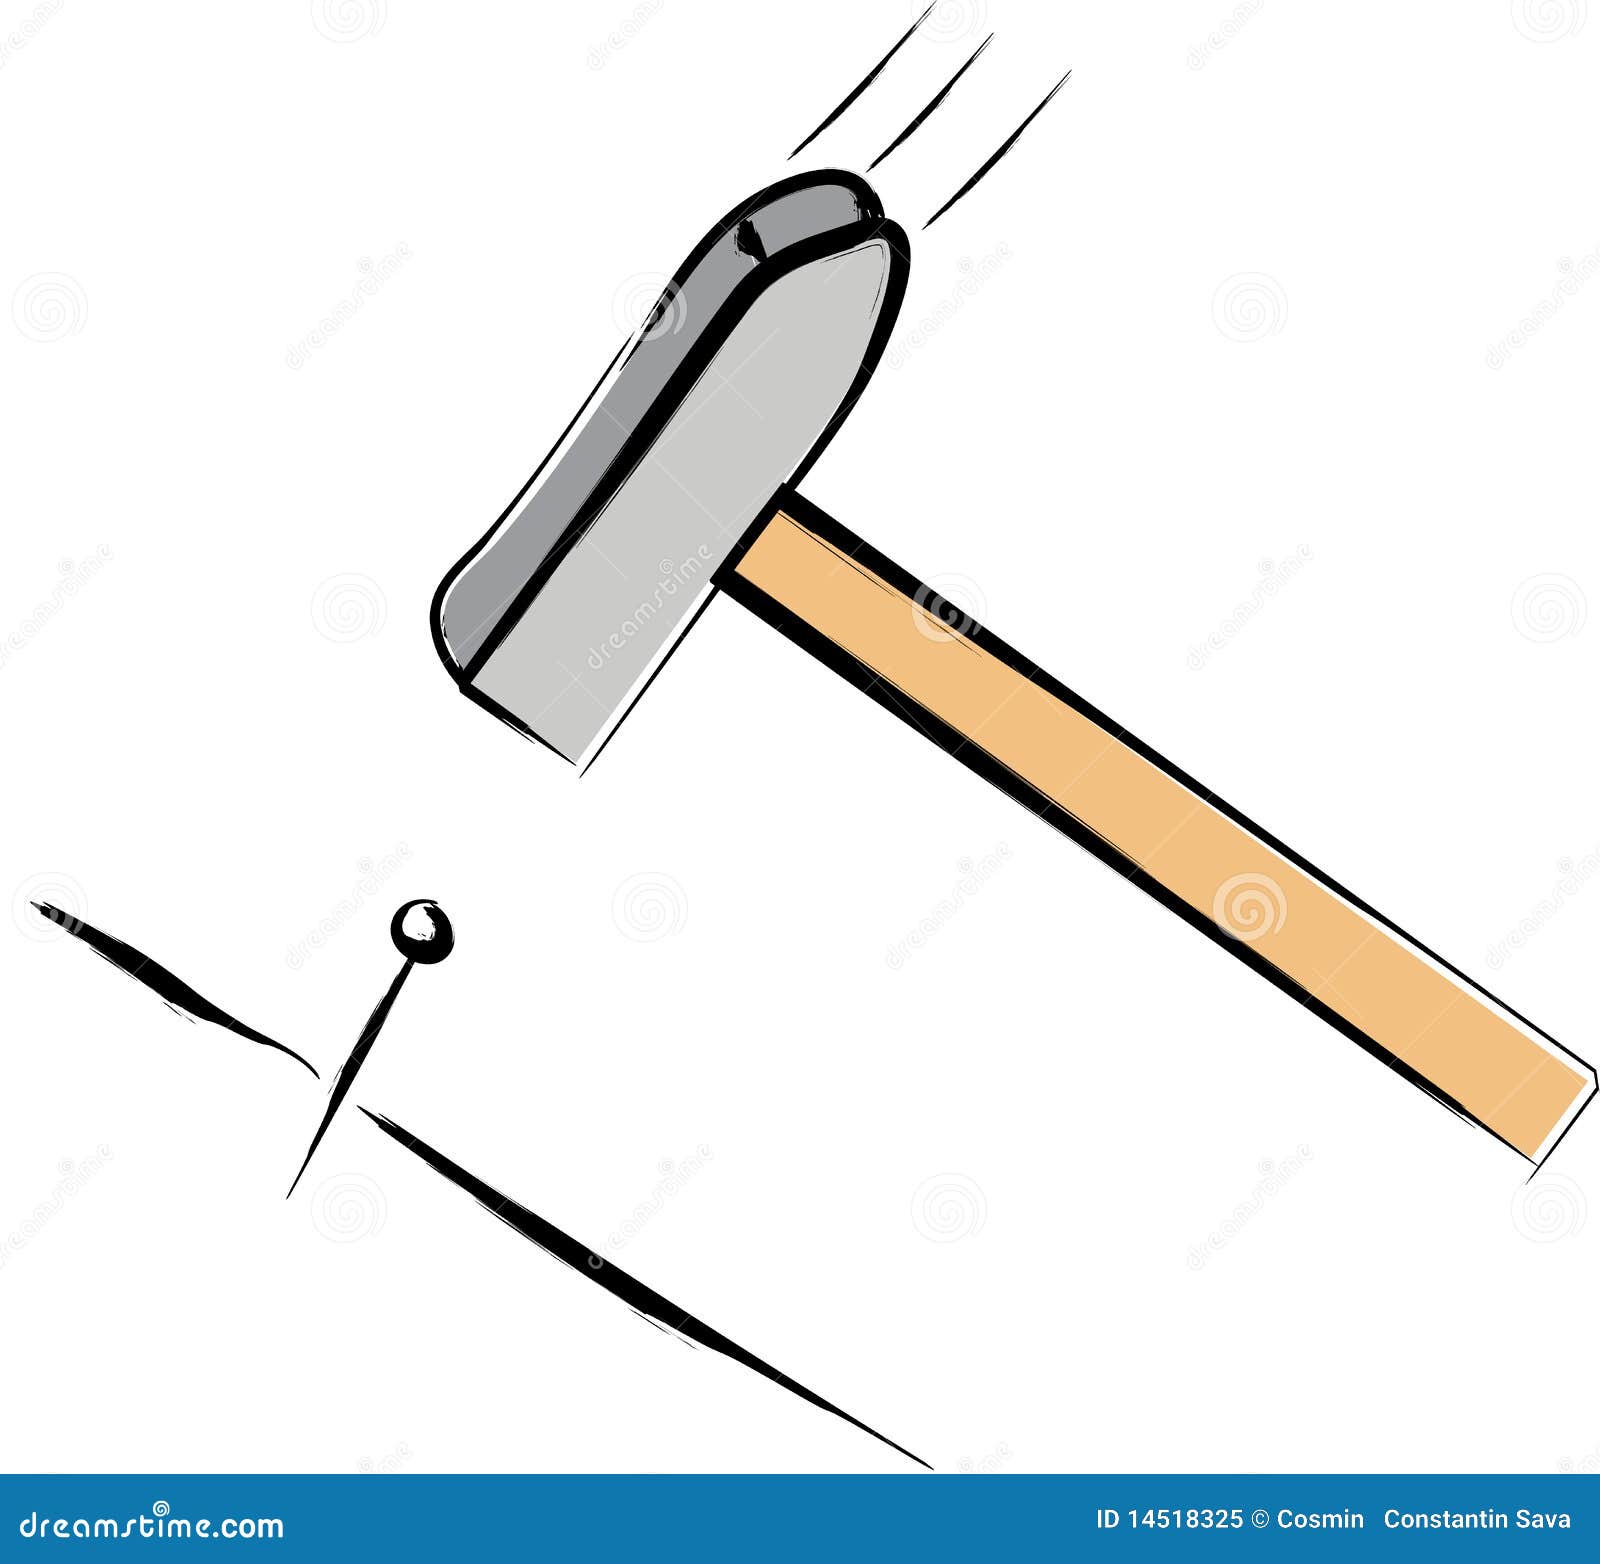 hammer and nails clipart - photo #45